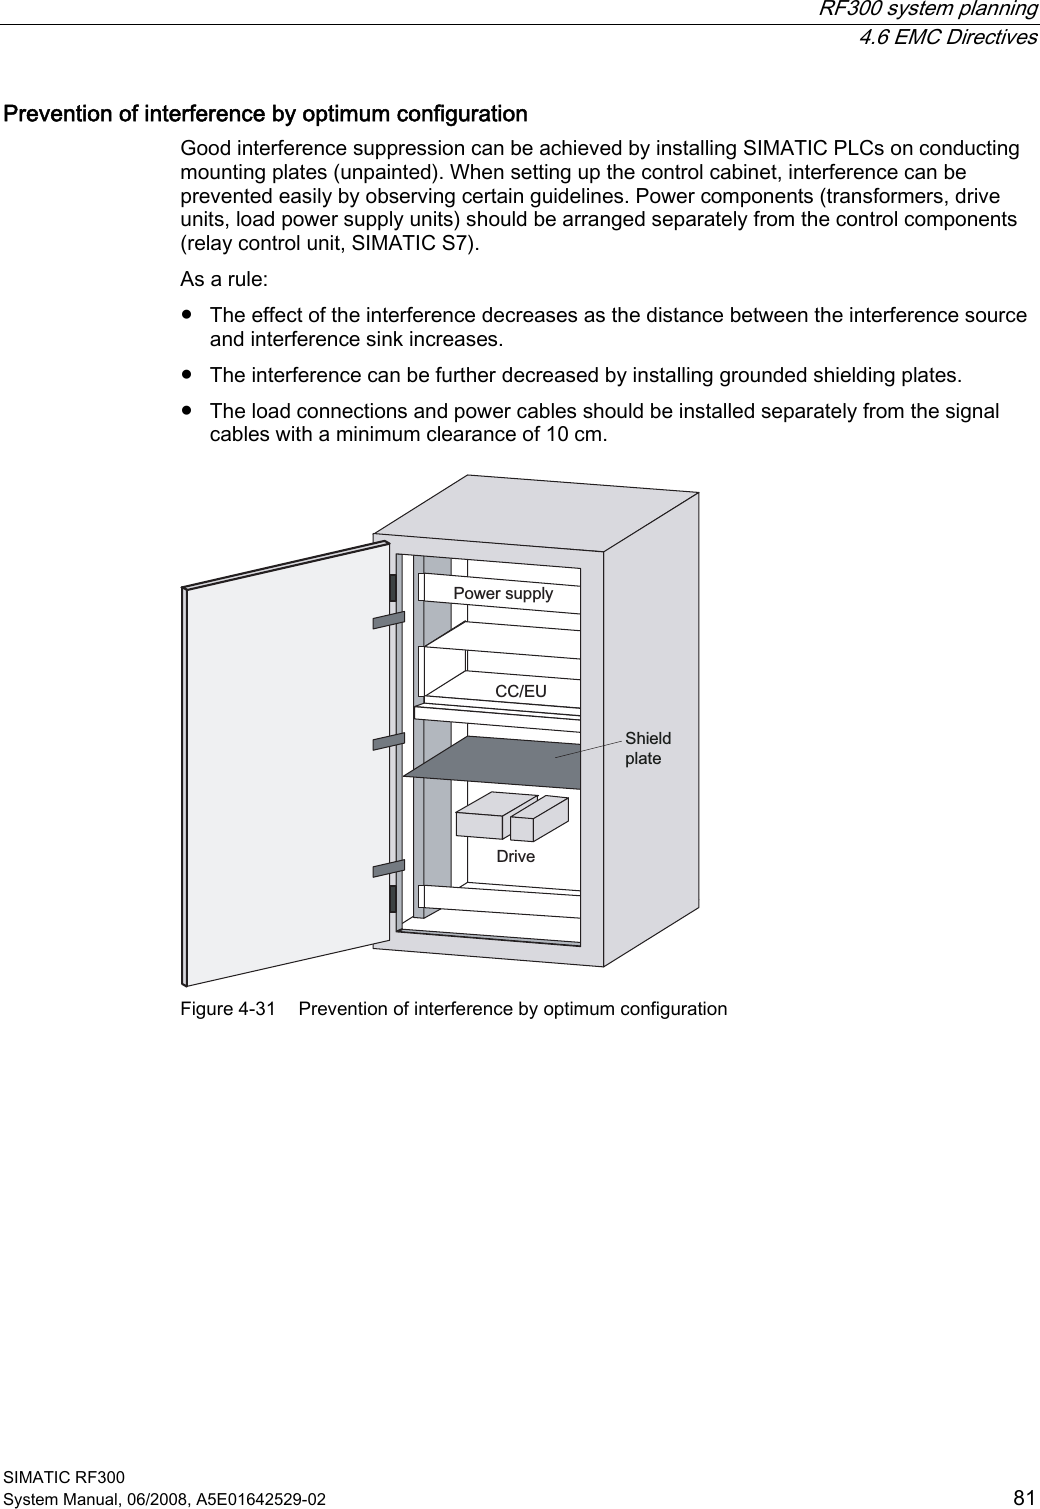  RF300 system planning  4.6 EMC Directives SIMATIC RF300 System Manual, 06/2008, A5E01642529-02  81 Prevention of interference by optimum configuration Good interference suppression can be achieved by installing SIMATIC PLCs on conducting mounting plates (unpainted). When setting up the control cabinet, interference can be prevented easily by observing certain guidelines. Power components (transformers, drive units, load power supply units) should be arranged separately from the control components (relay control unit, SIMATIC S7). As a rule: ● The effect of the interference decreases as the distance between the interference source and interference sink increases. ● The interference can be further decreased by installing grounded shielding plates. ● The load connections and power cables should be installed separately from the signal cables with a minimum clearance of 10 cm. 3RZHUVXSSO\&amp;&amp;(8&apos;ULYH6KLHOGSODWH Figure 4-31  Prevention of interference by optimum configuration 